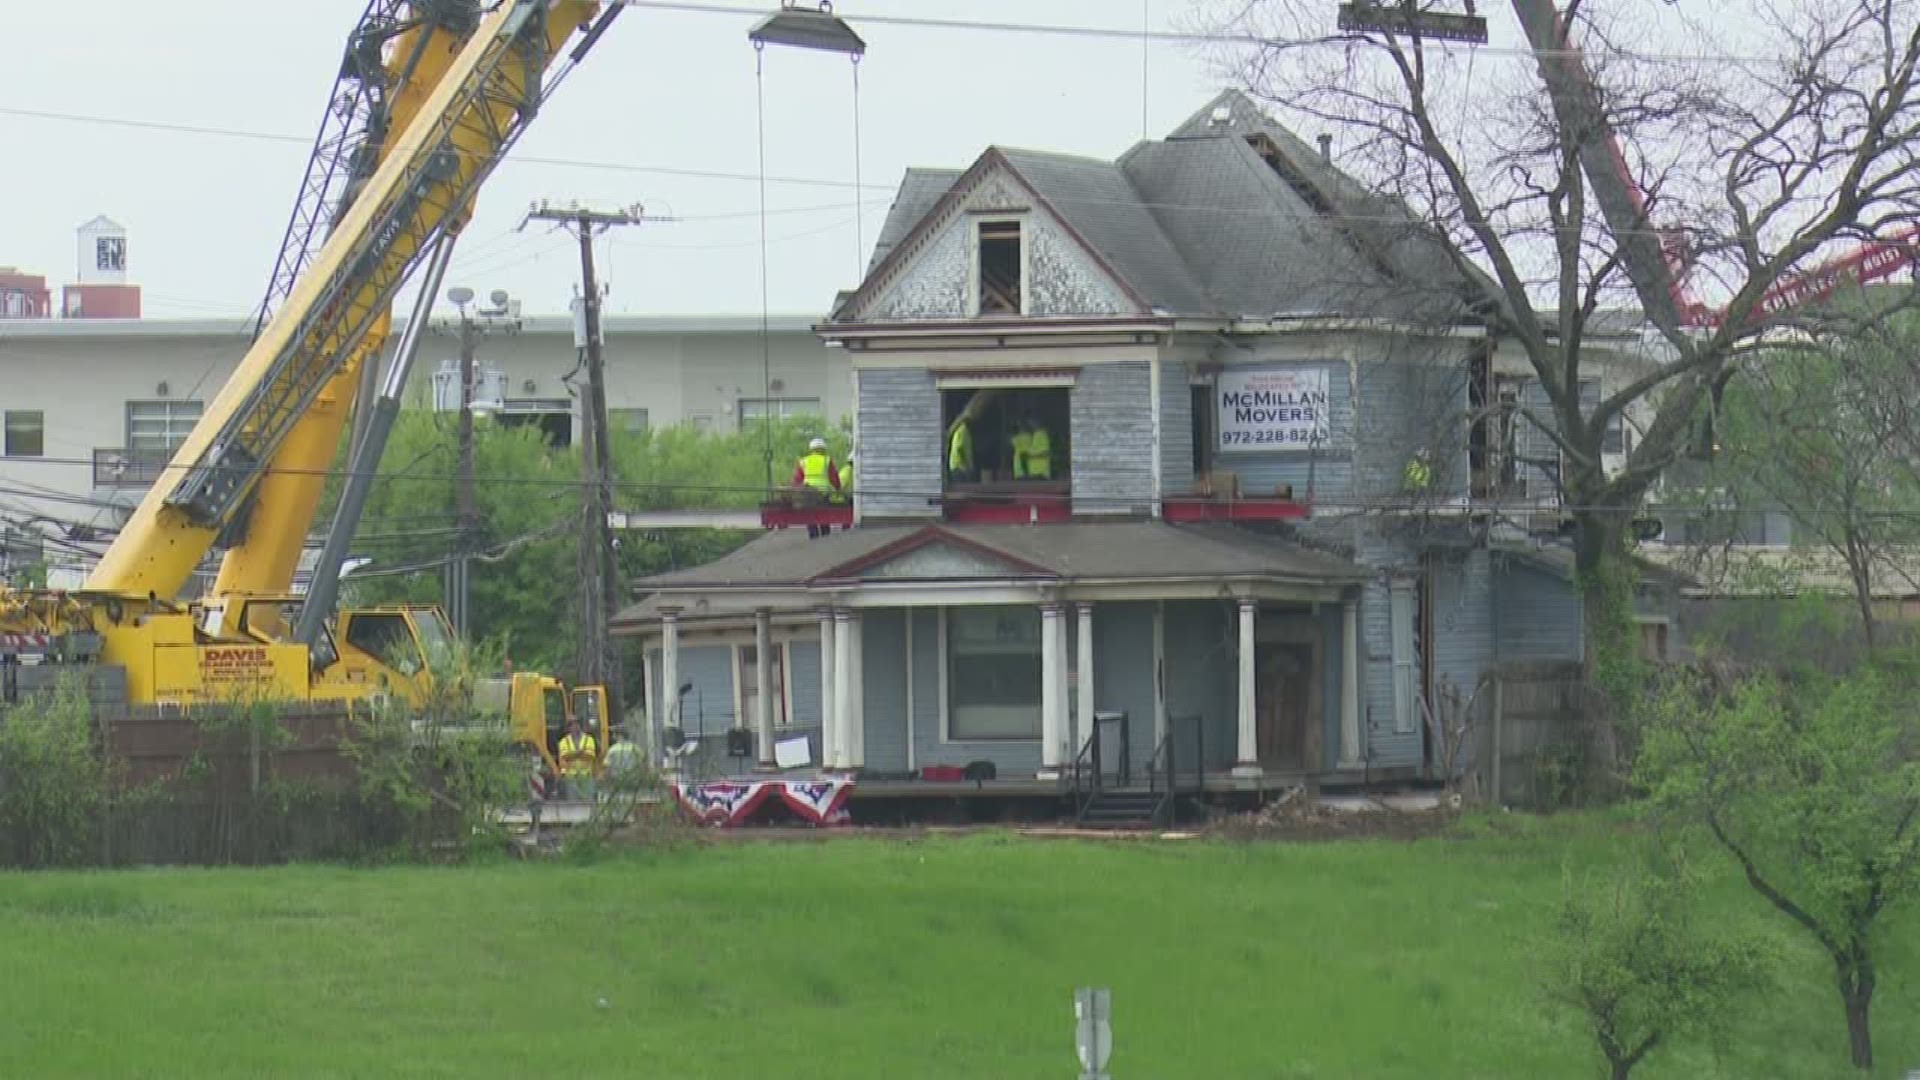 133-year-old house being moved